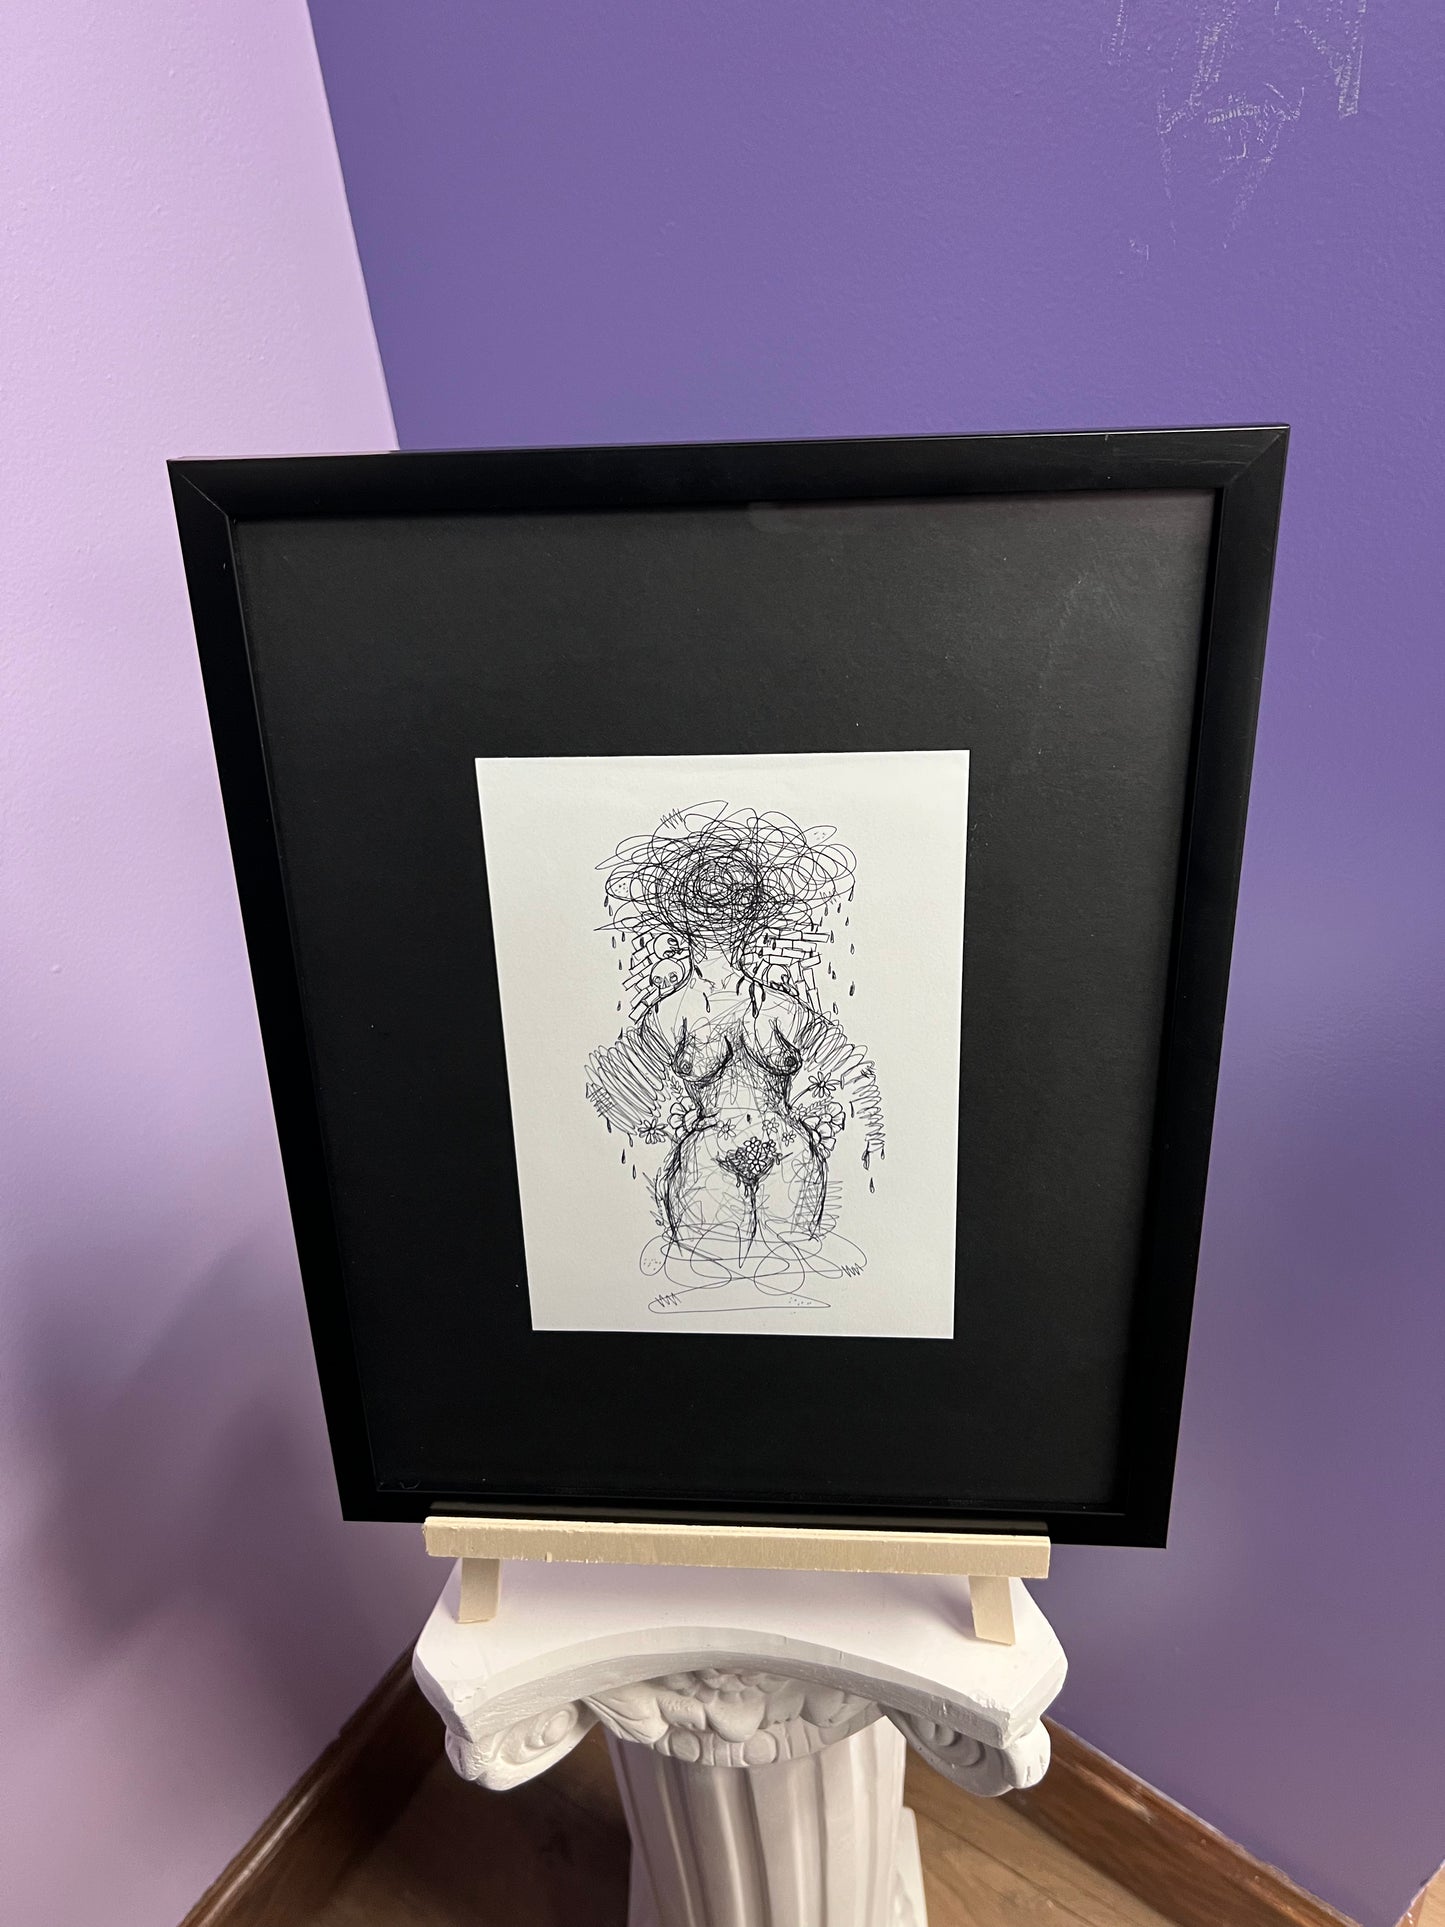 "Anxiously Holding The Weight Of My Dreams" Framed Original